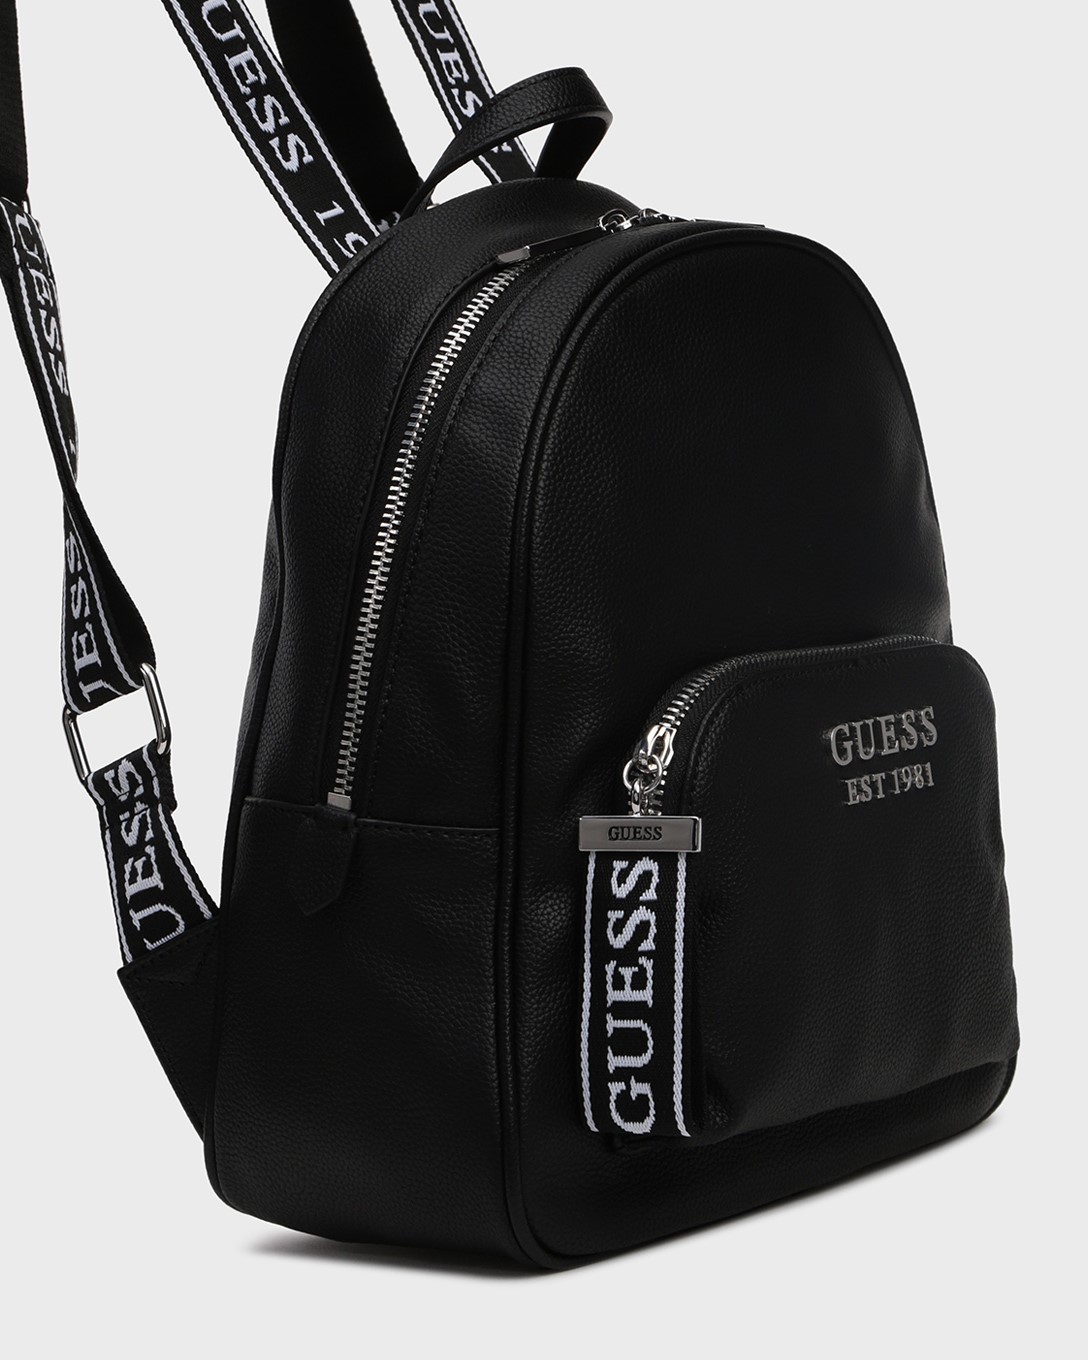 BALO NỮ GUESS BACKPACK 3